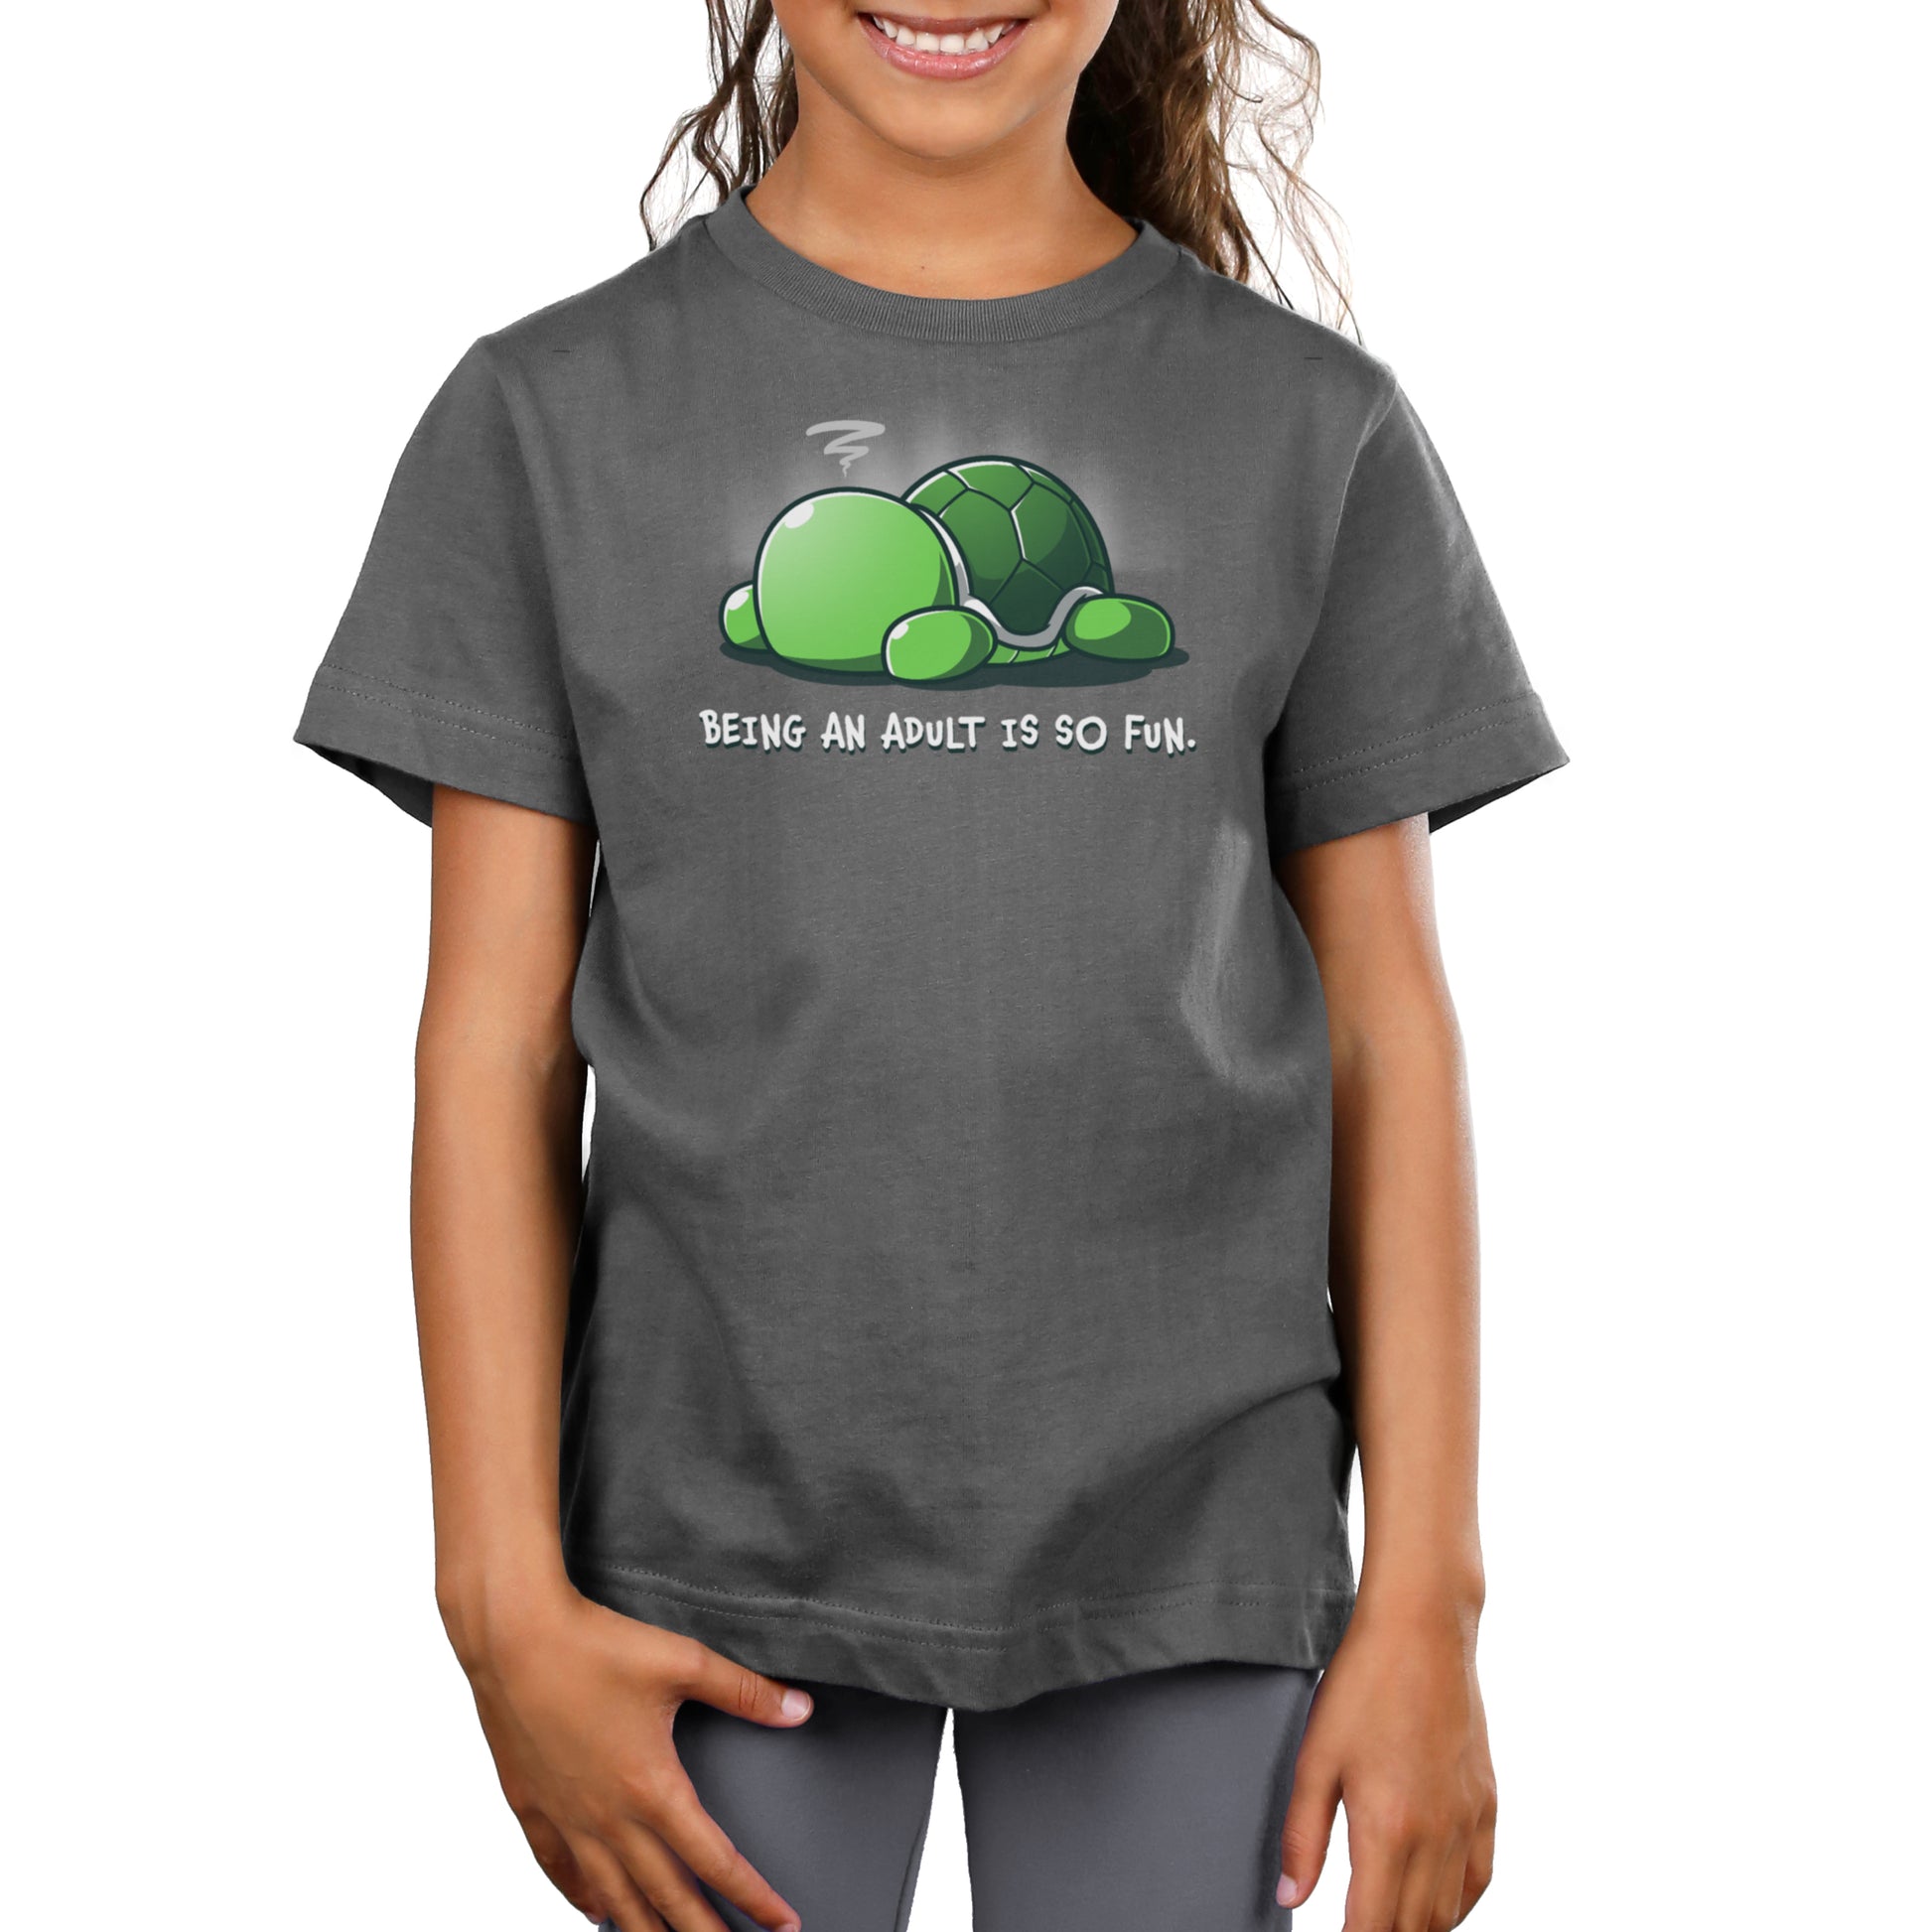 Premium Cotton T-shirt - A smiling child wearing a super soft ringspun cotton dark gray apparel with a cartoon turtle and the text "Being An Adult Is So Fun" by monsterdigital.